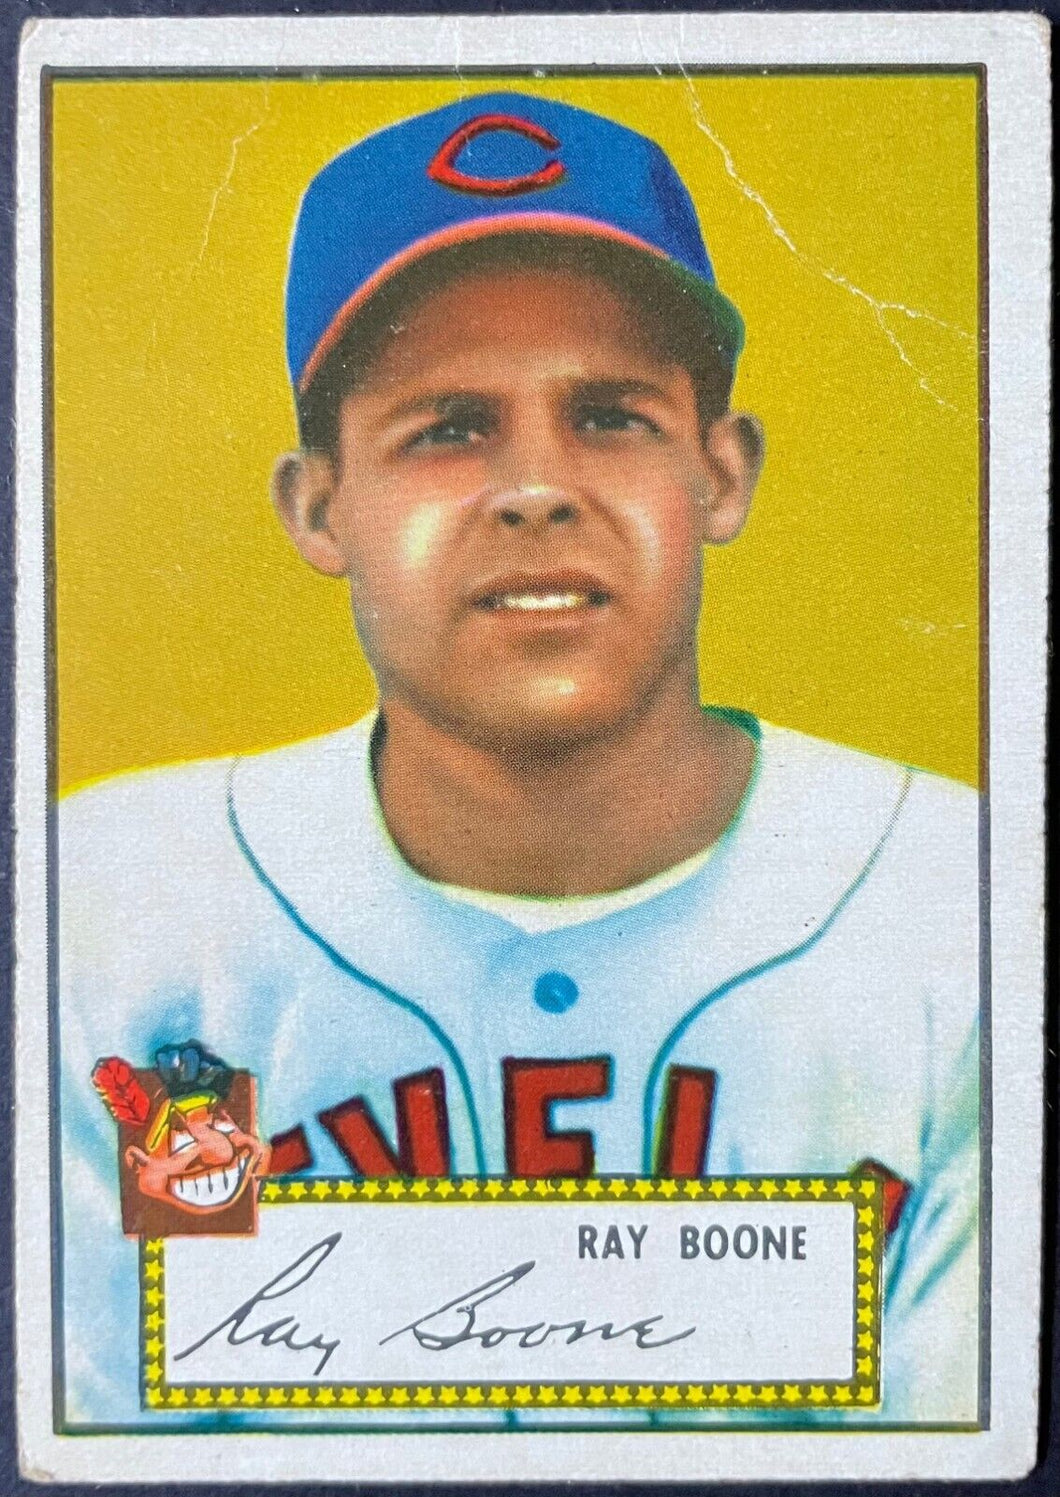 1952 Topps Baseball Ray Boone #55 Chicago Cubs Vintage MLB Card